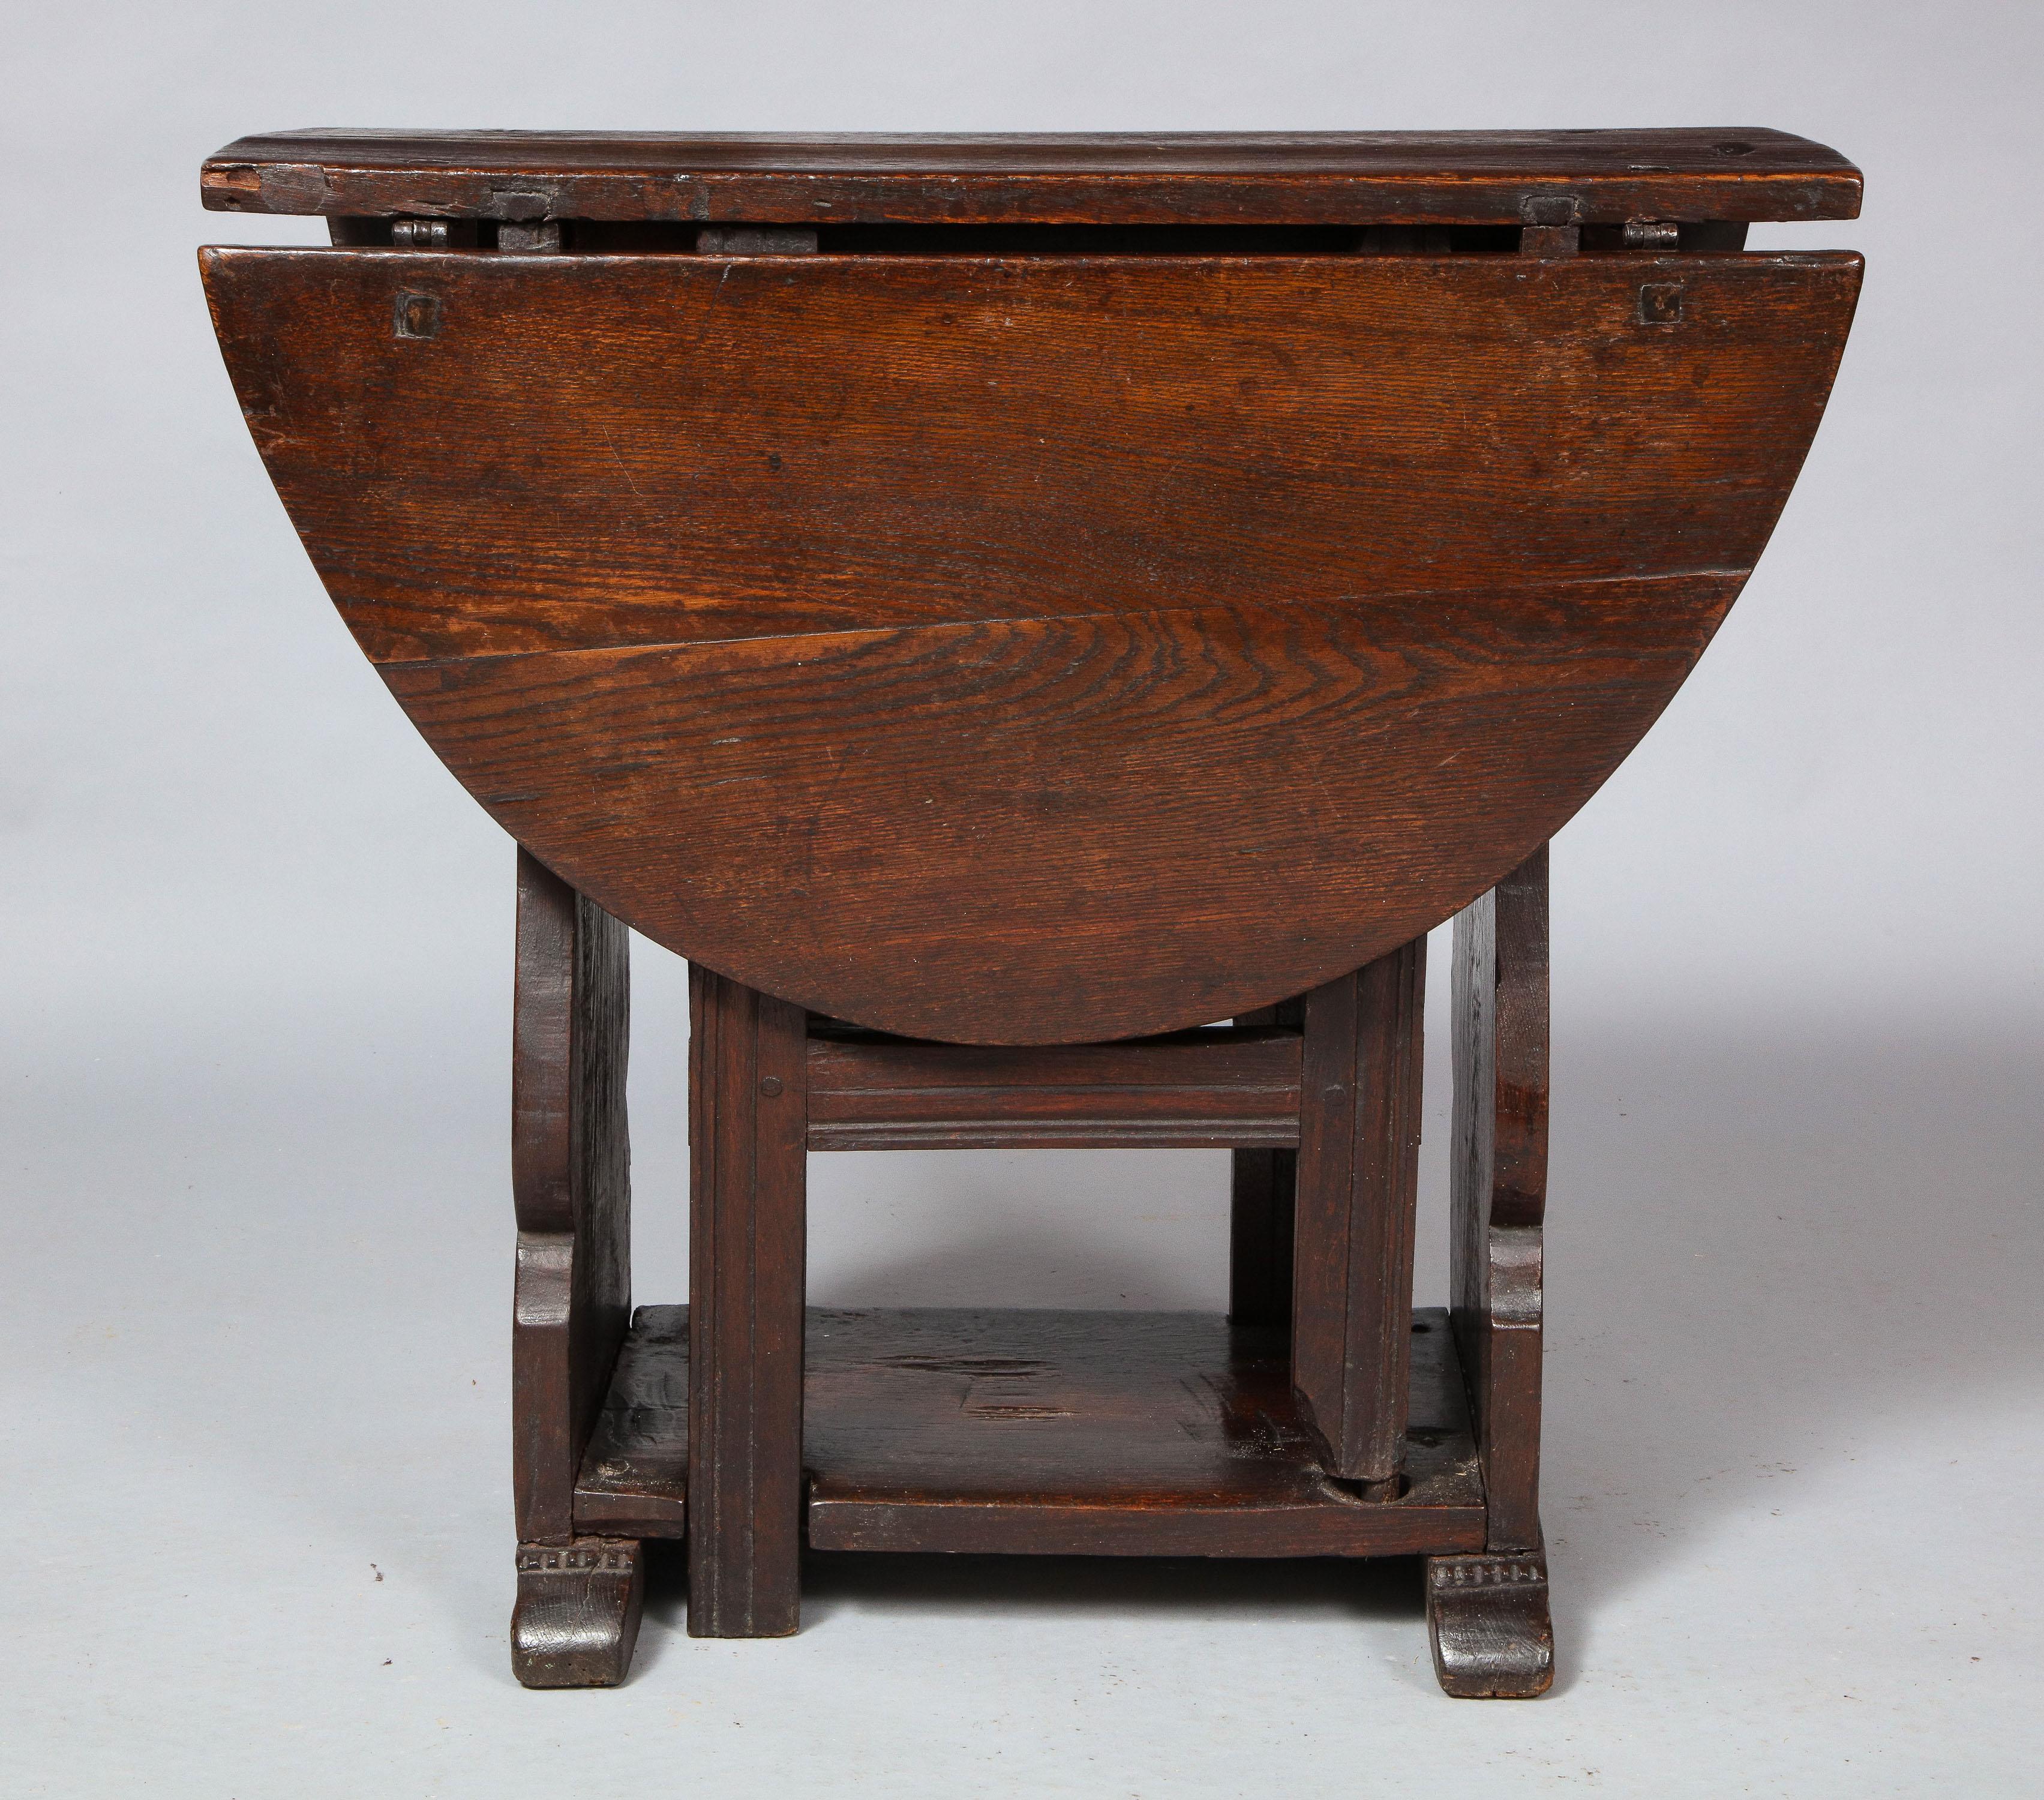 Good late 17th century English or Welsh oak gateleg table, the oval top over balustrade silhouette slap ends, one with drawer, the swing legs of simple boarded construction, standing on shaped shoe feet, the whole possessing good rich color and